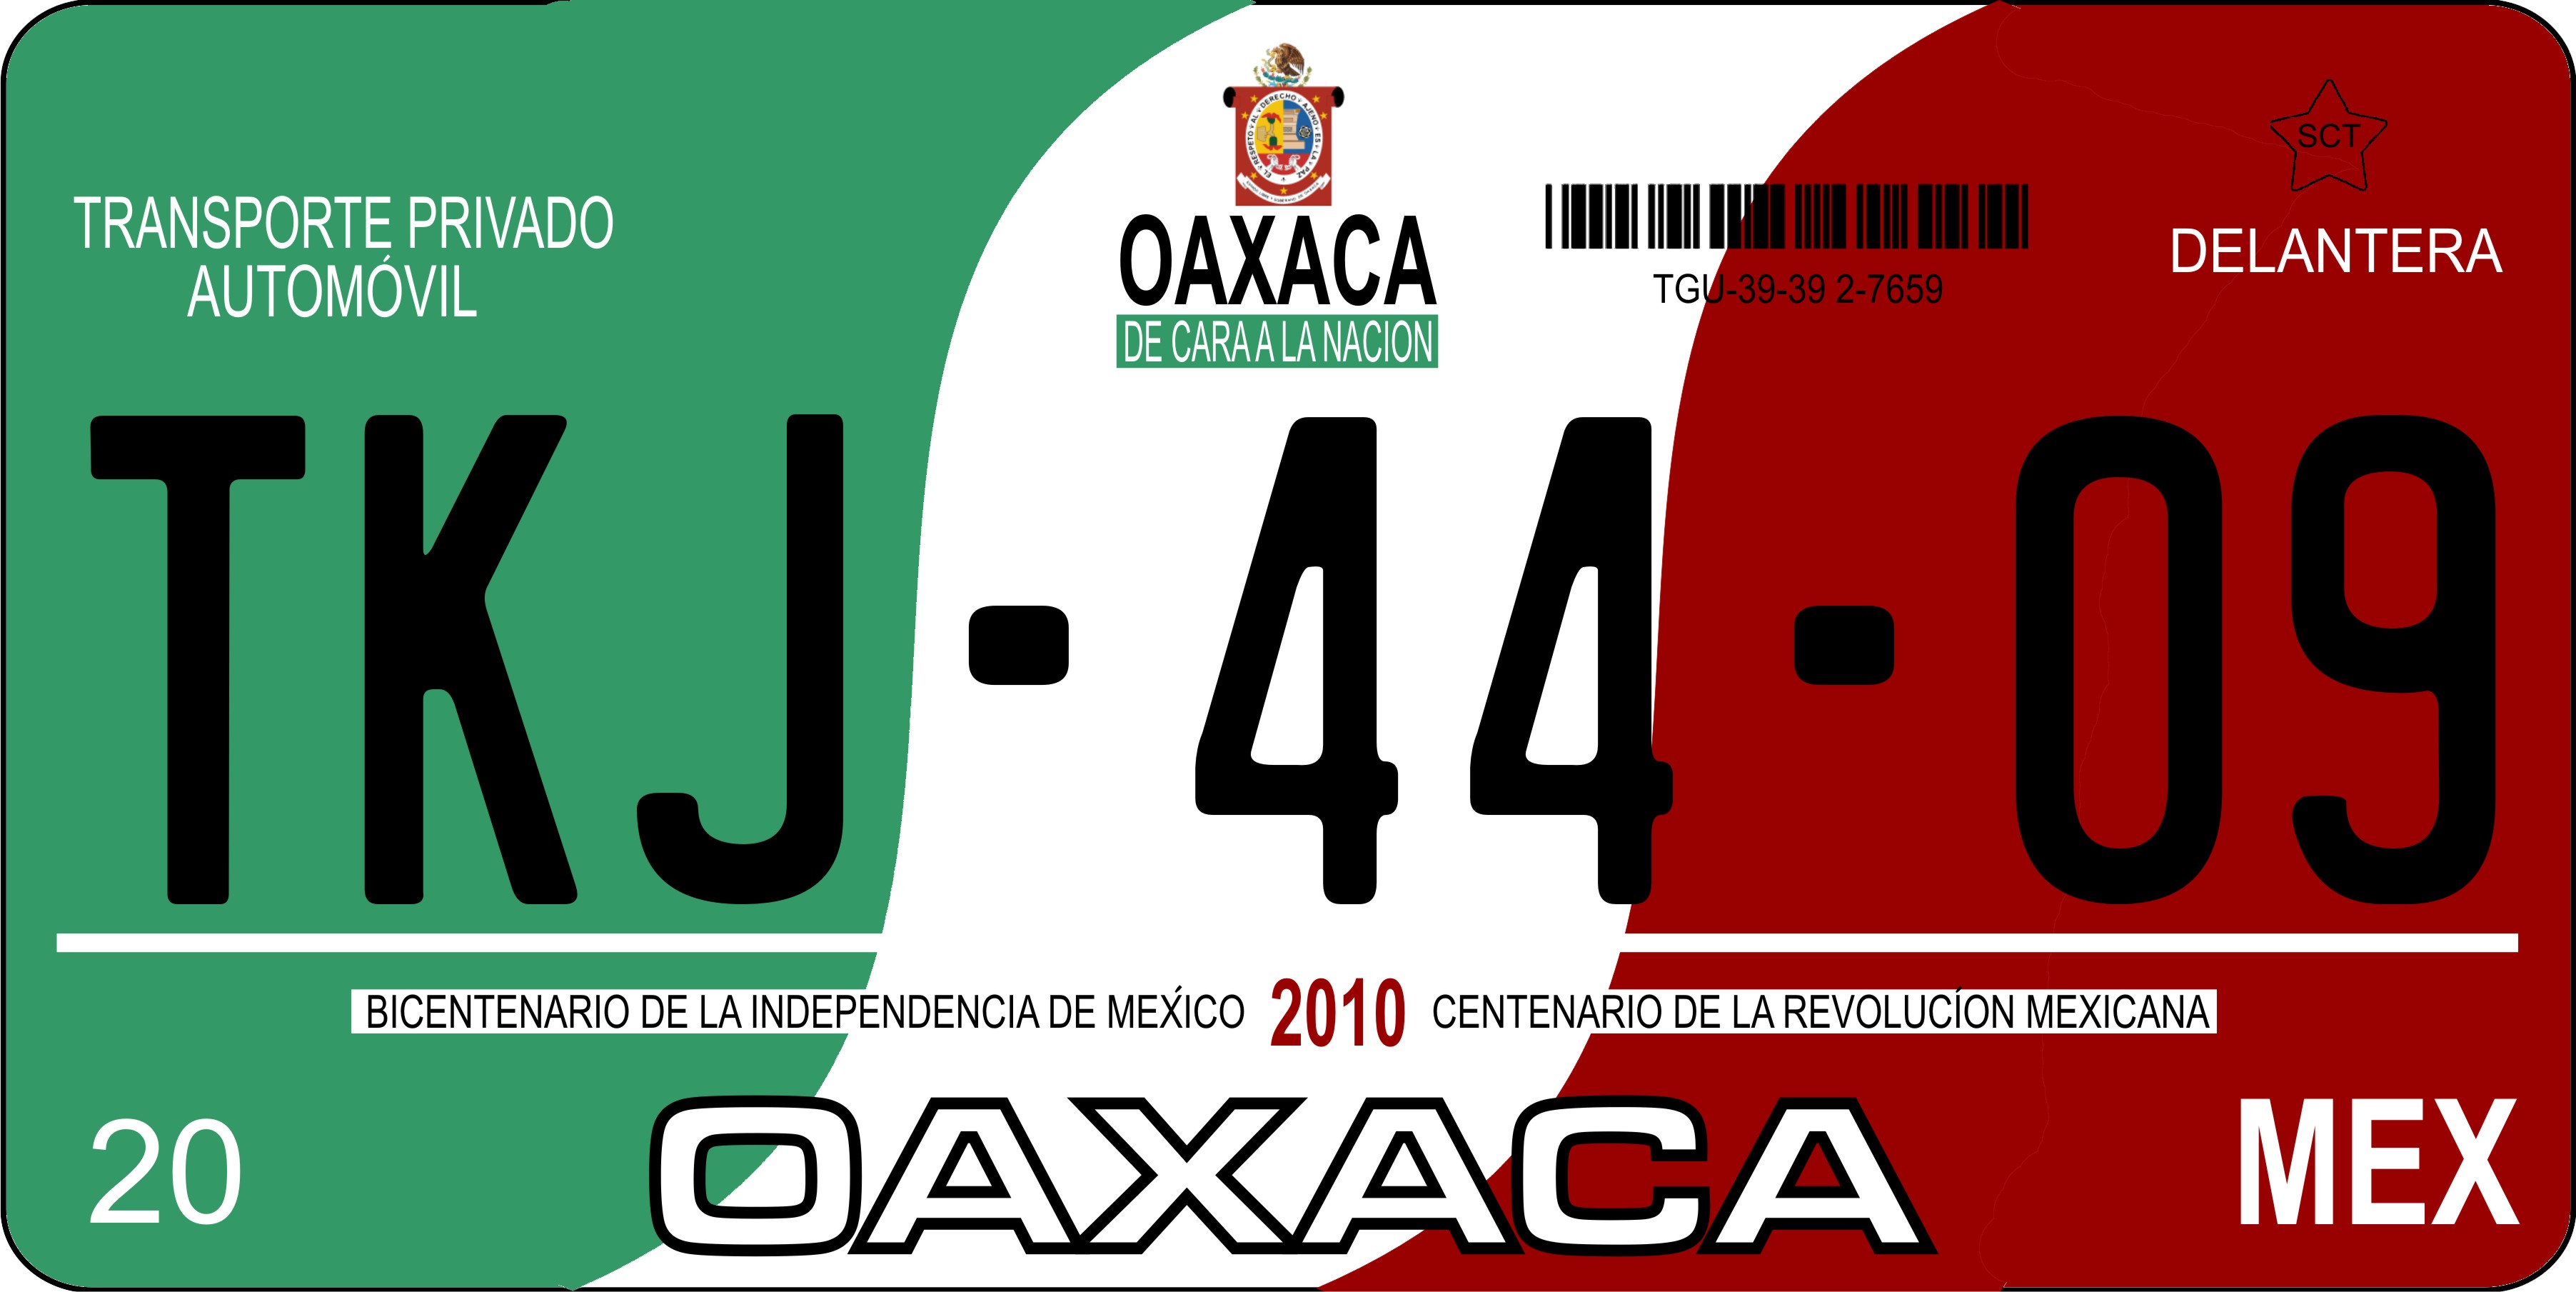 Mexico Oaxaca Photo LICENSE PLATE  Free Personalization on this PLATE